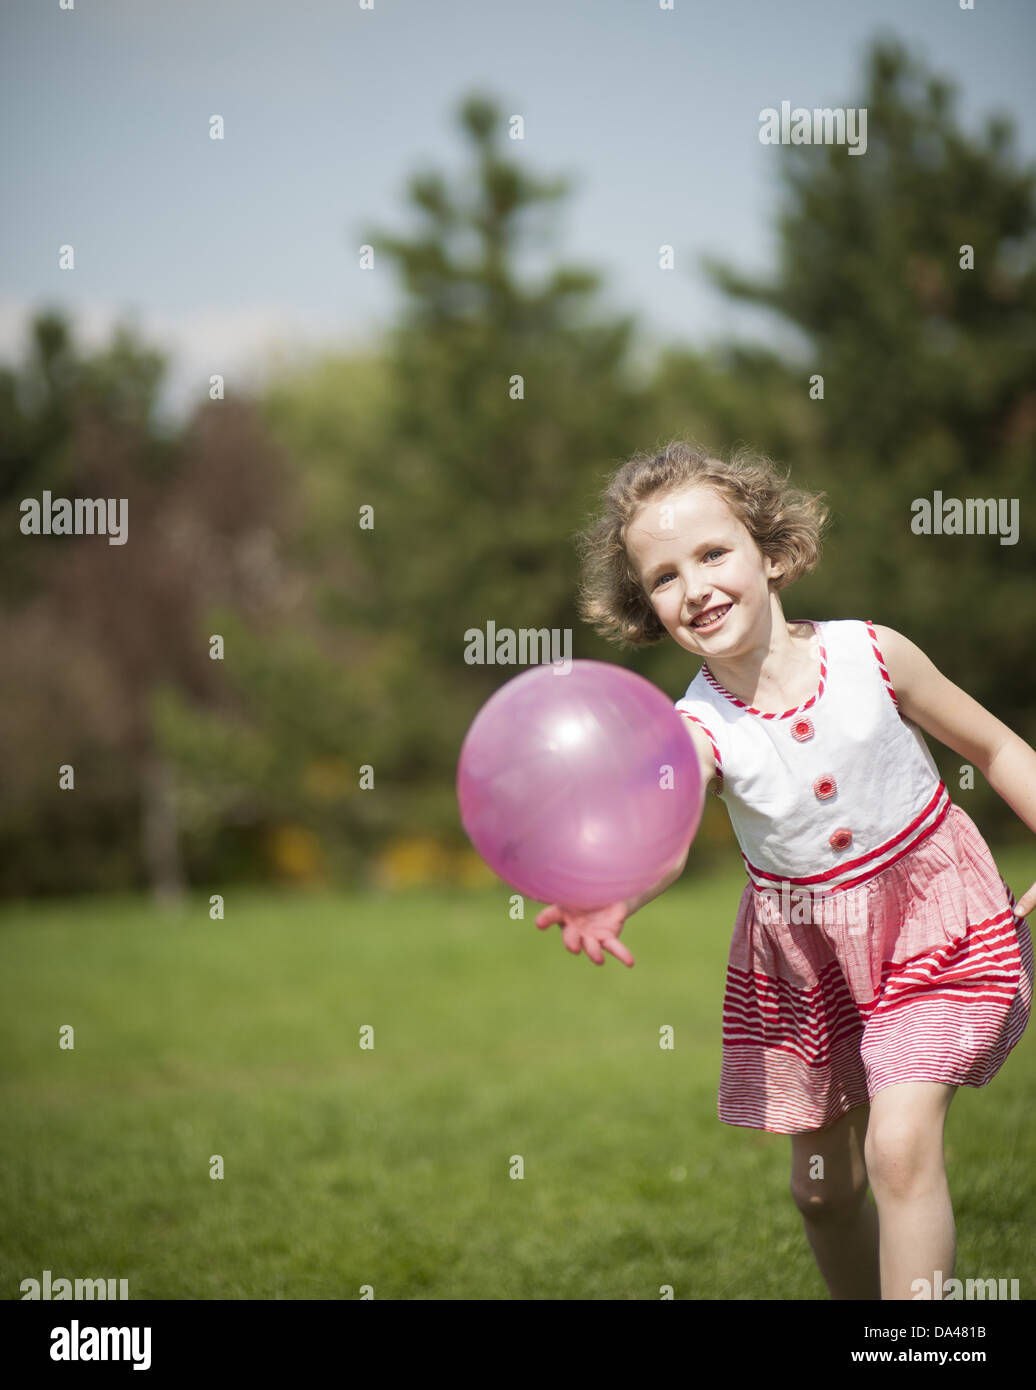 Young girl playing with purple ball in the park Stock Photo